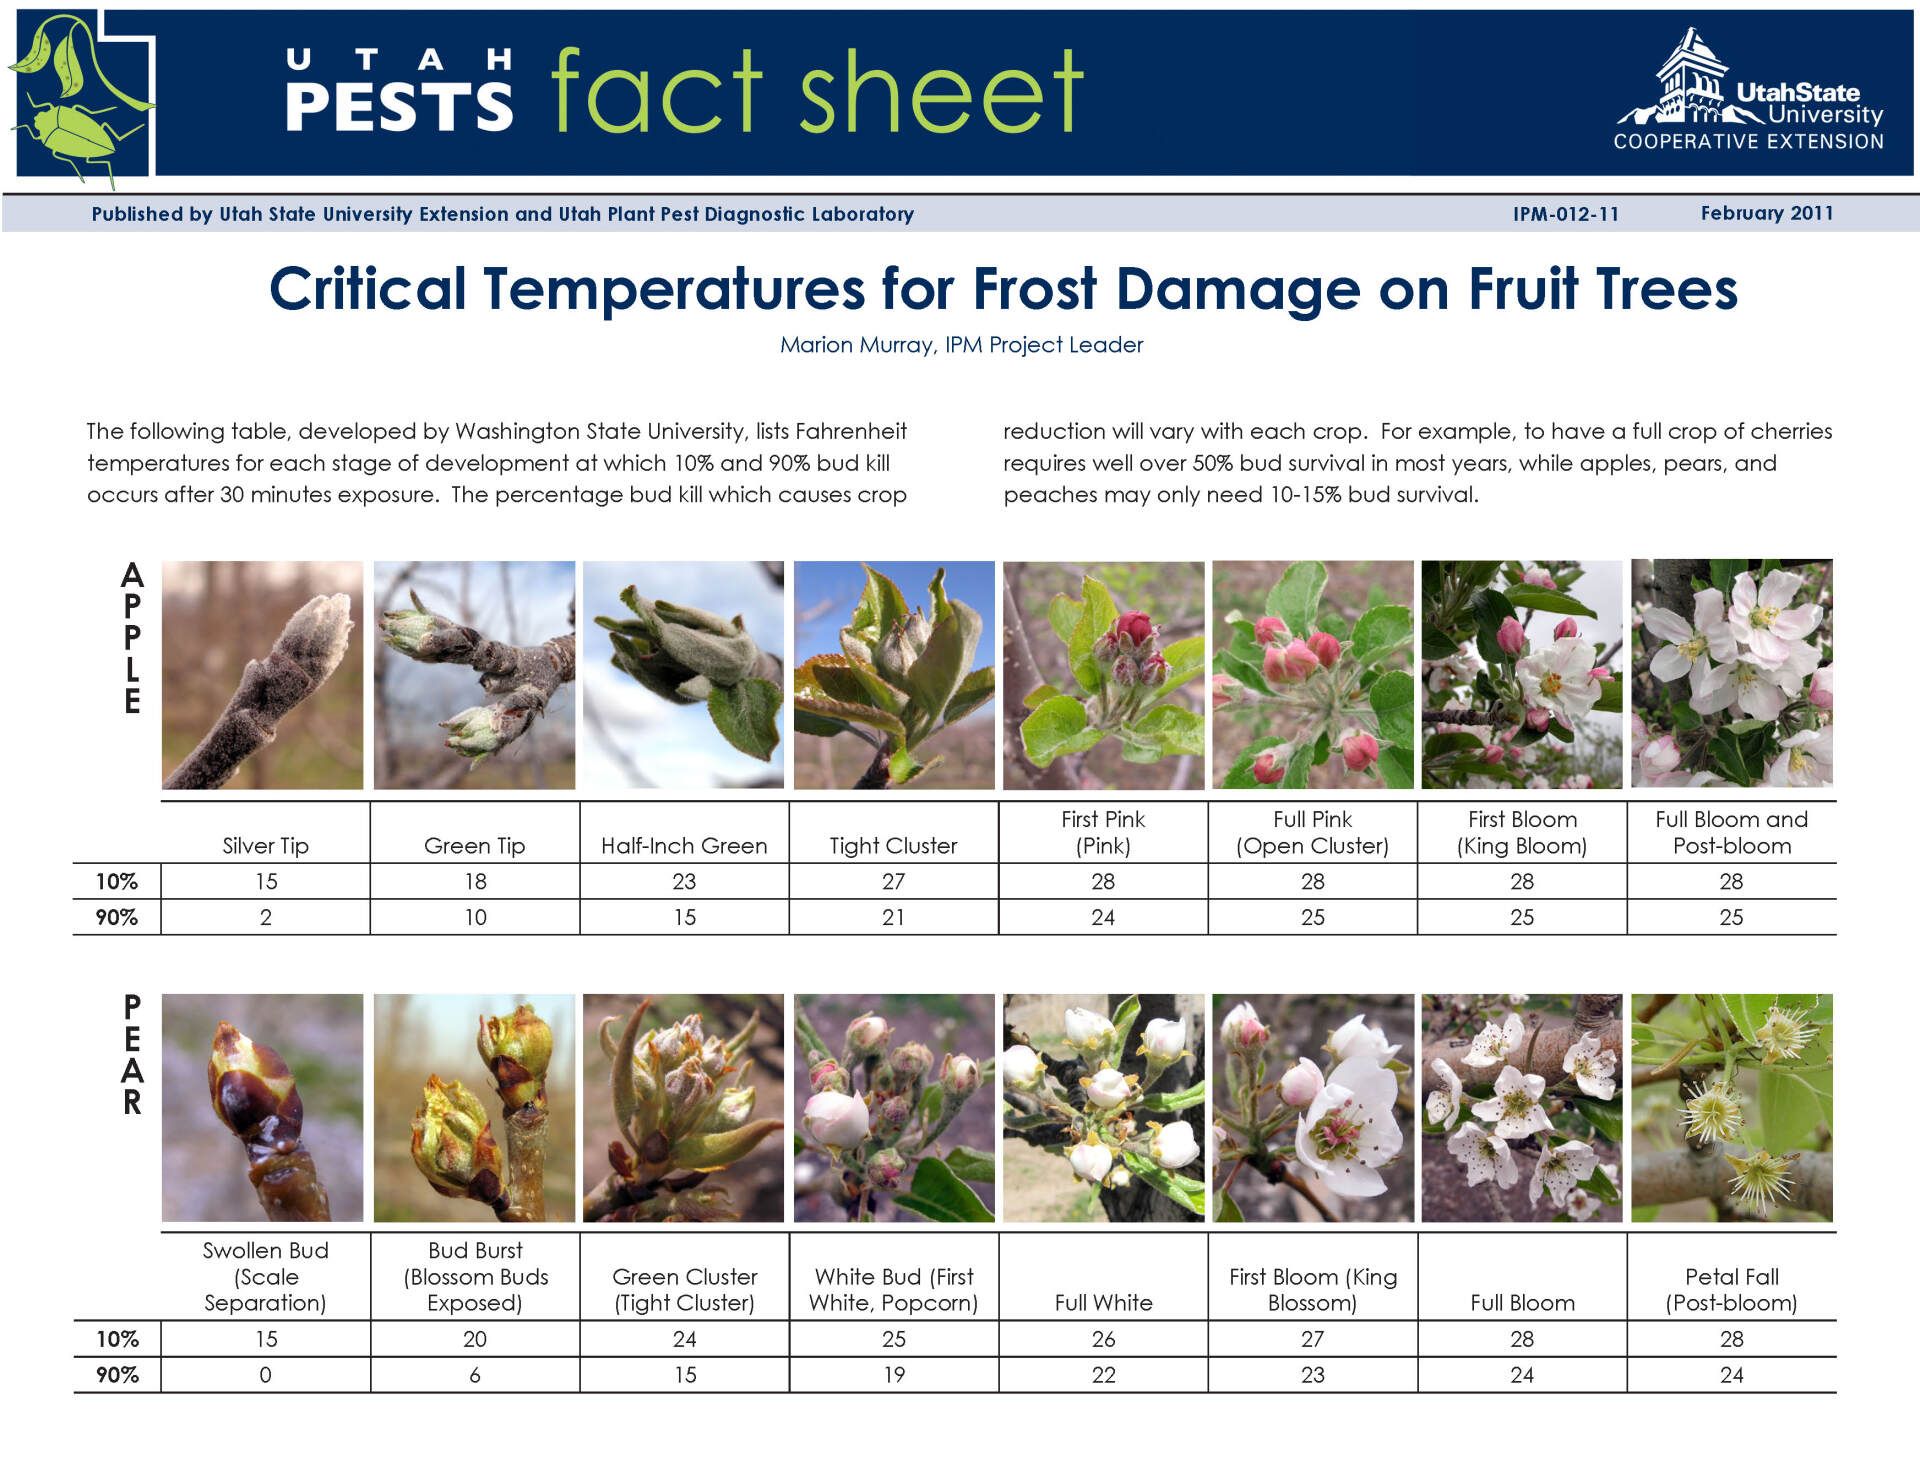 Critical Temperatures for Frost Damage on Fruit Trees